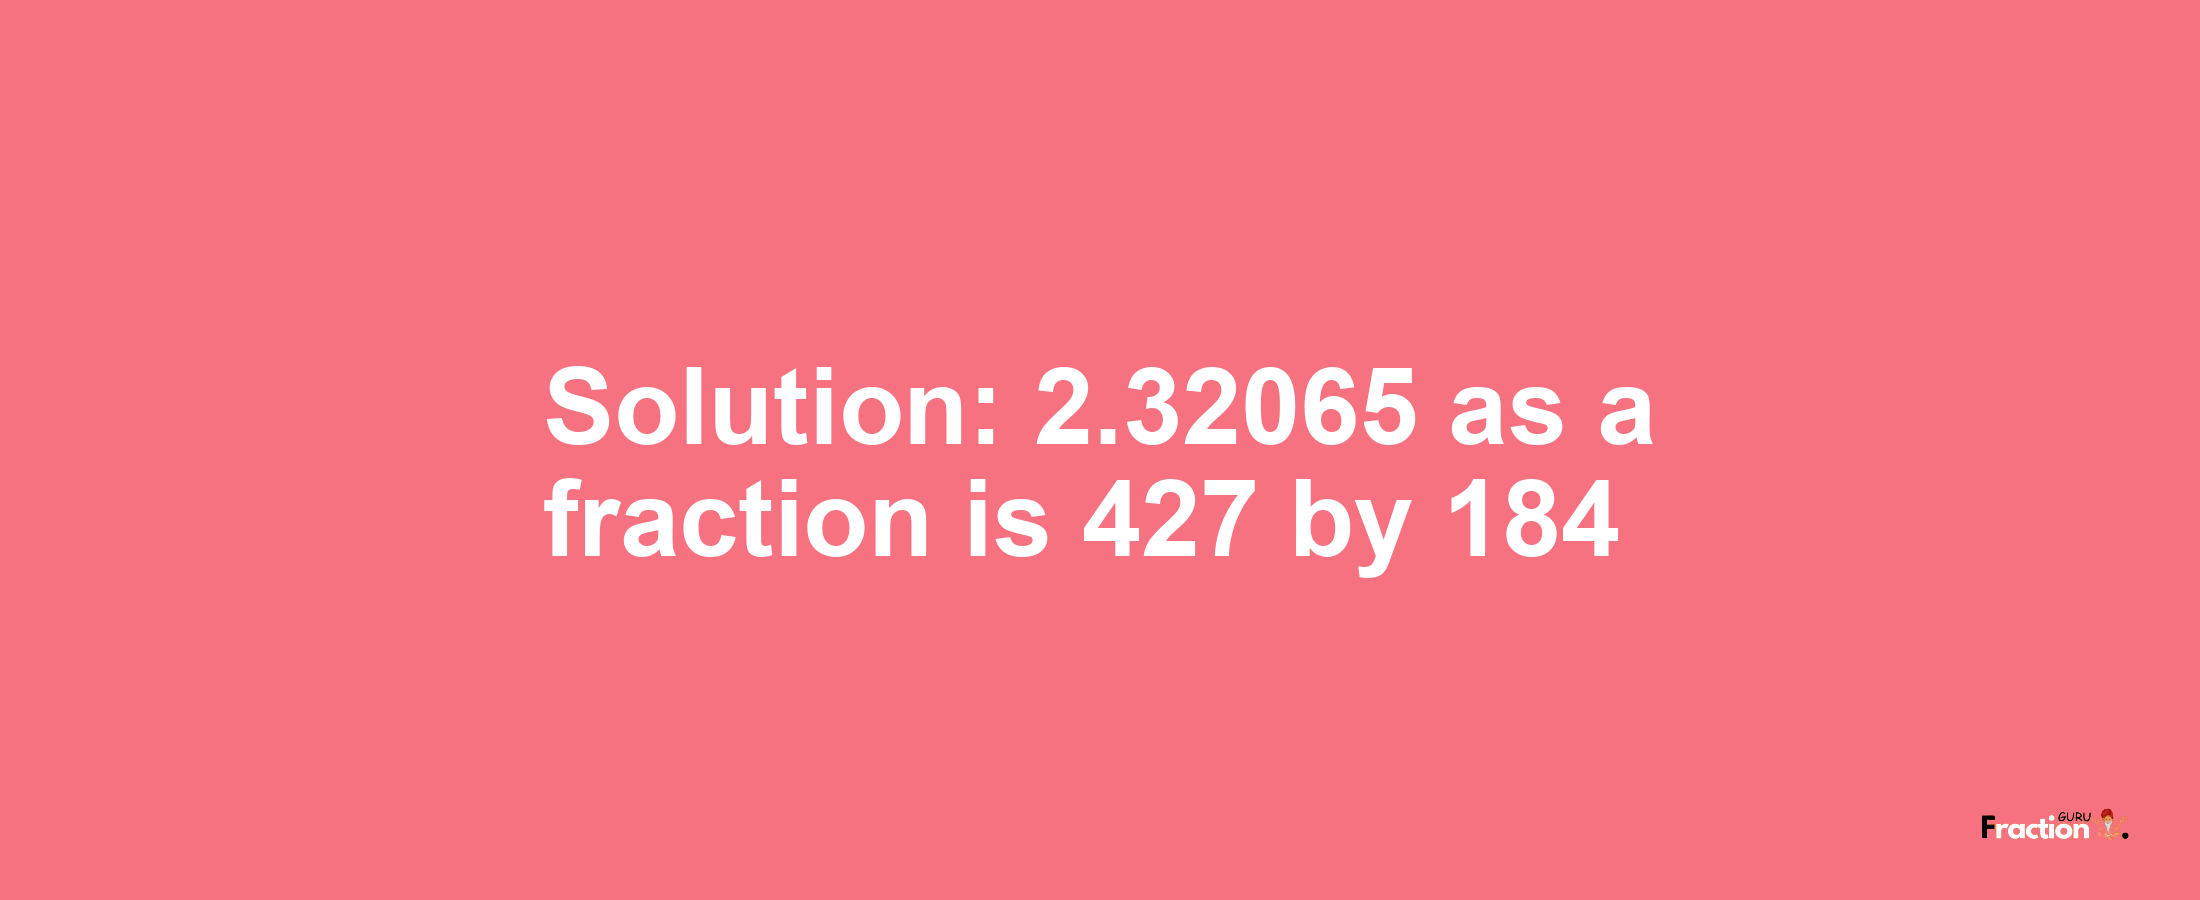 Solution:2.32065 as a fraction is 427/184